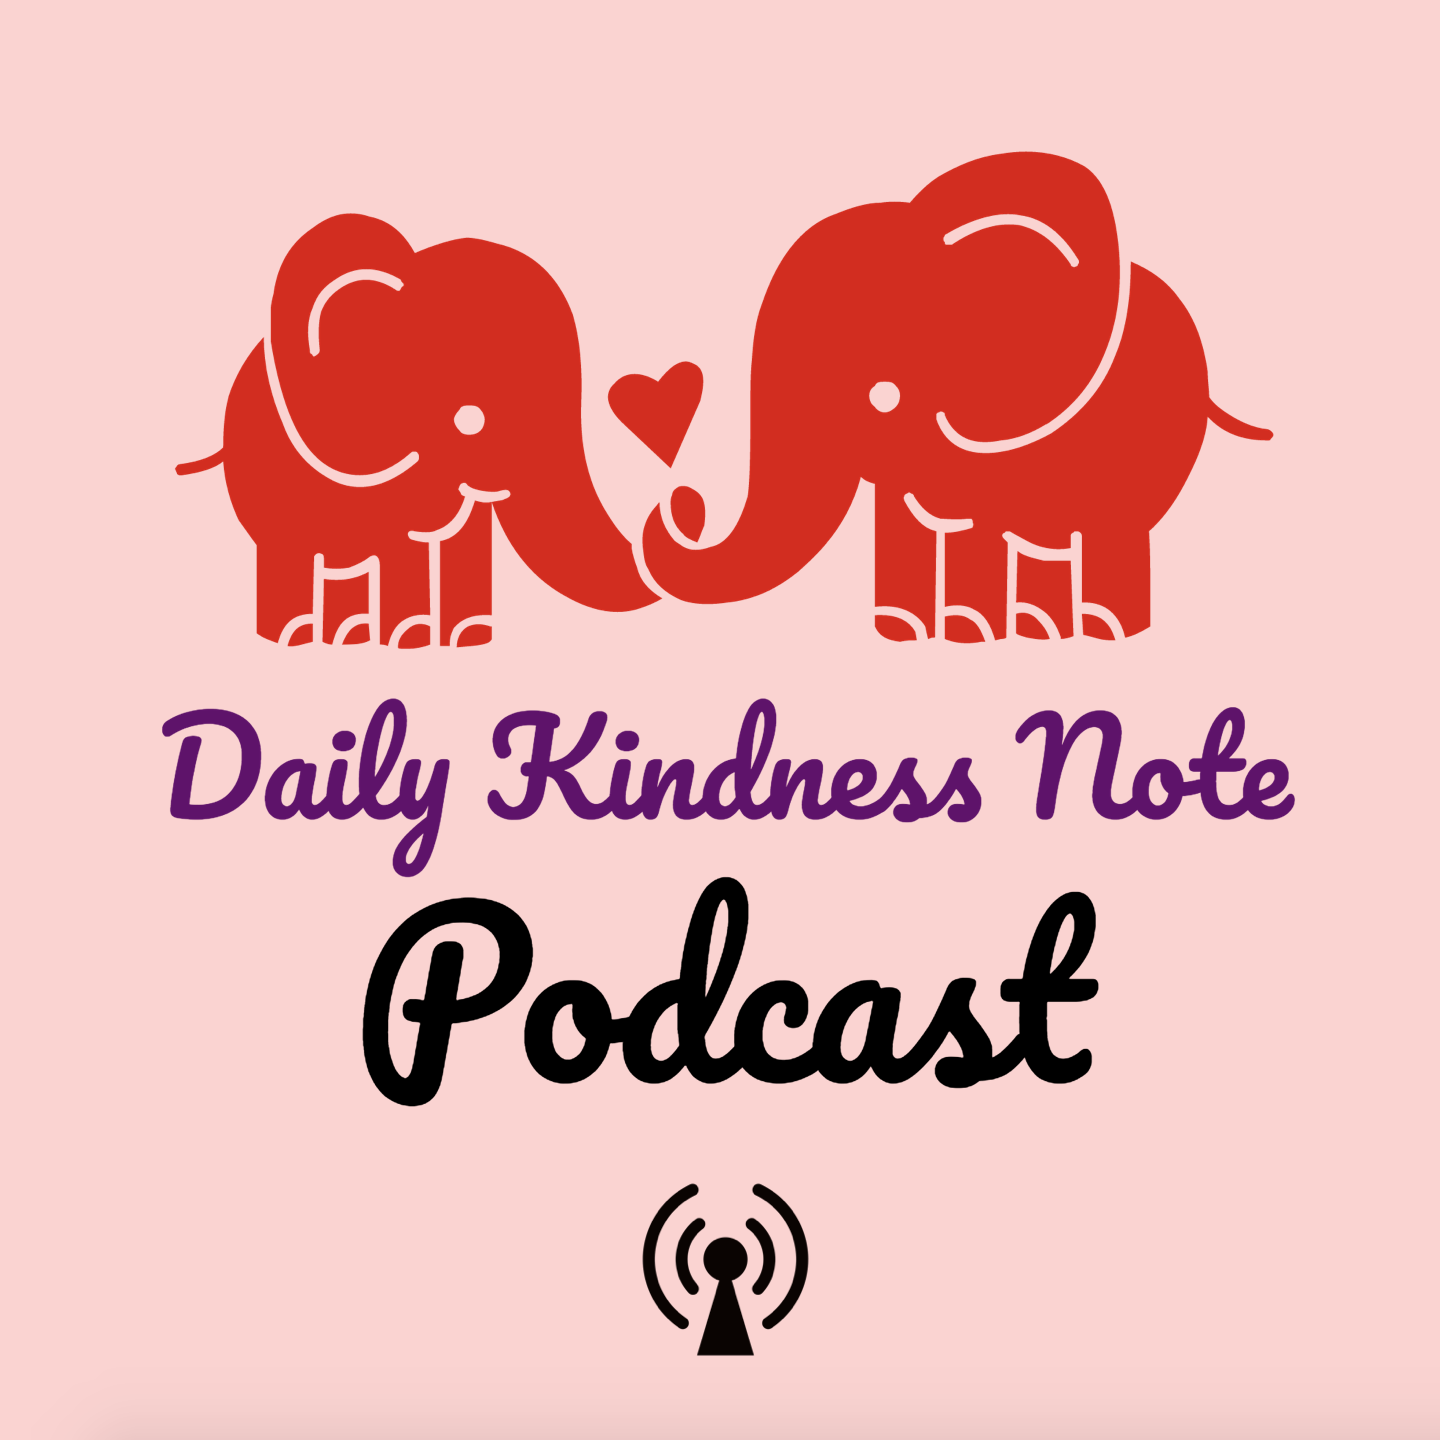 Daily Kindness Note Podcast - Ep. 12: Feel Appreciation for the Beauty Around Us